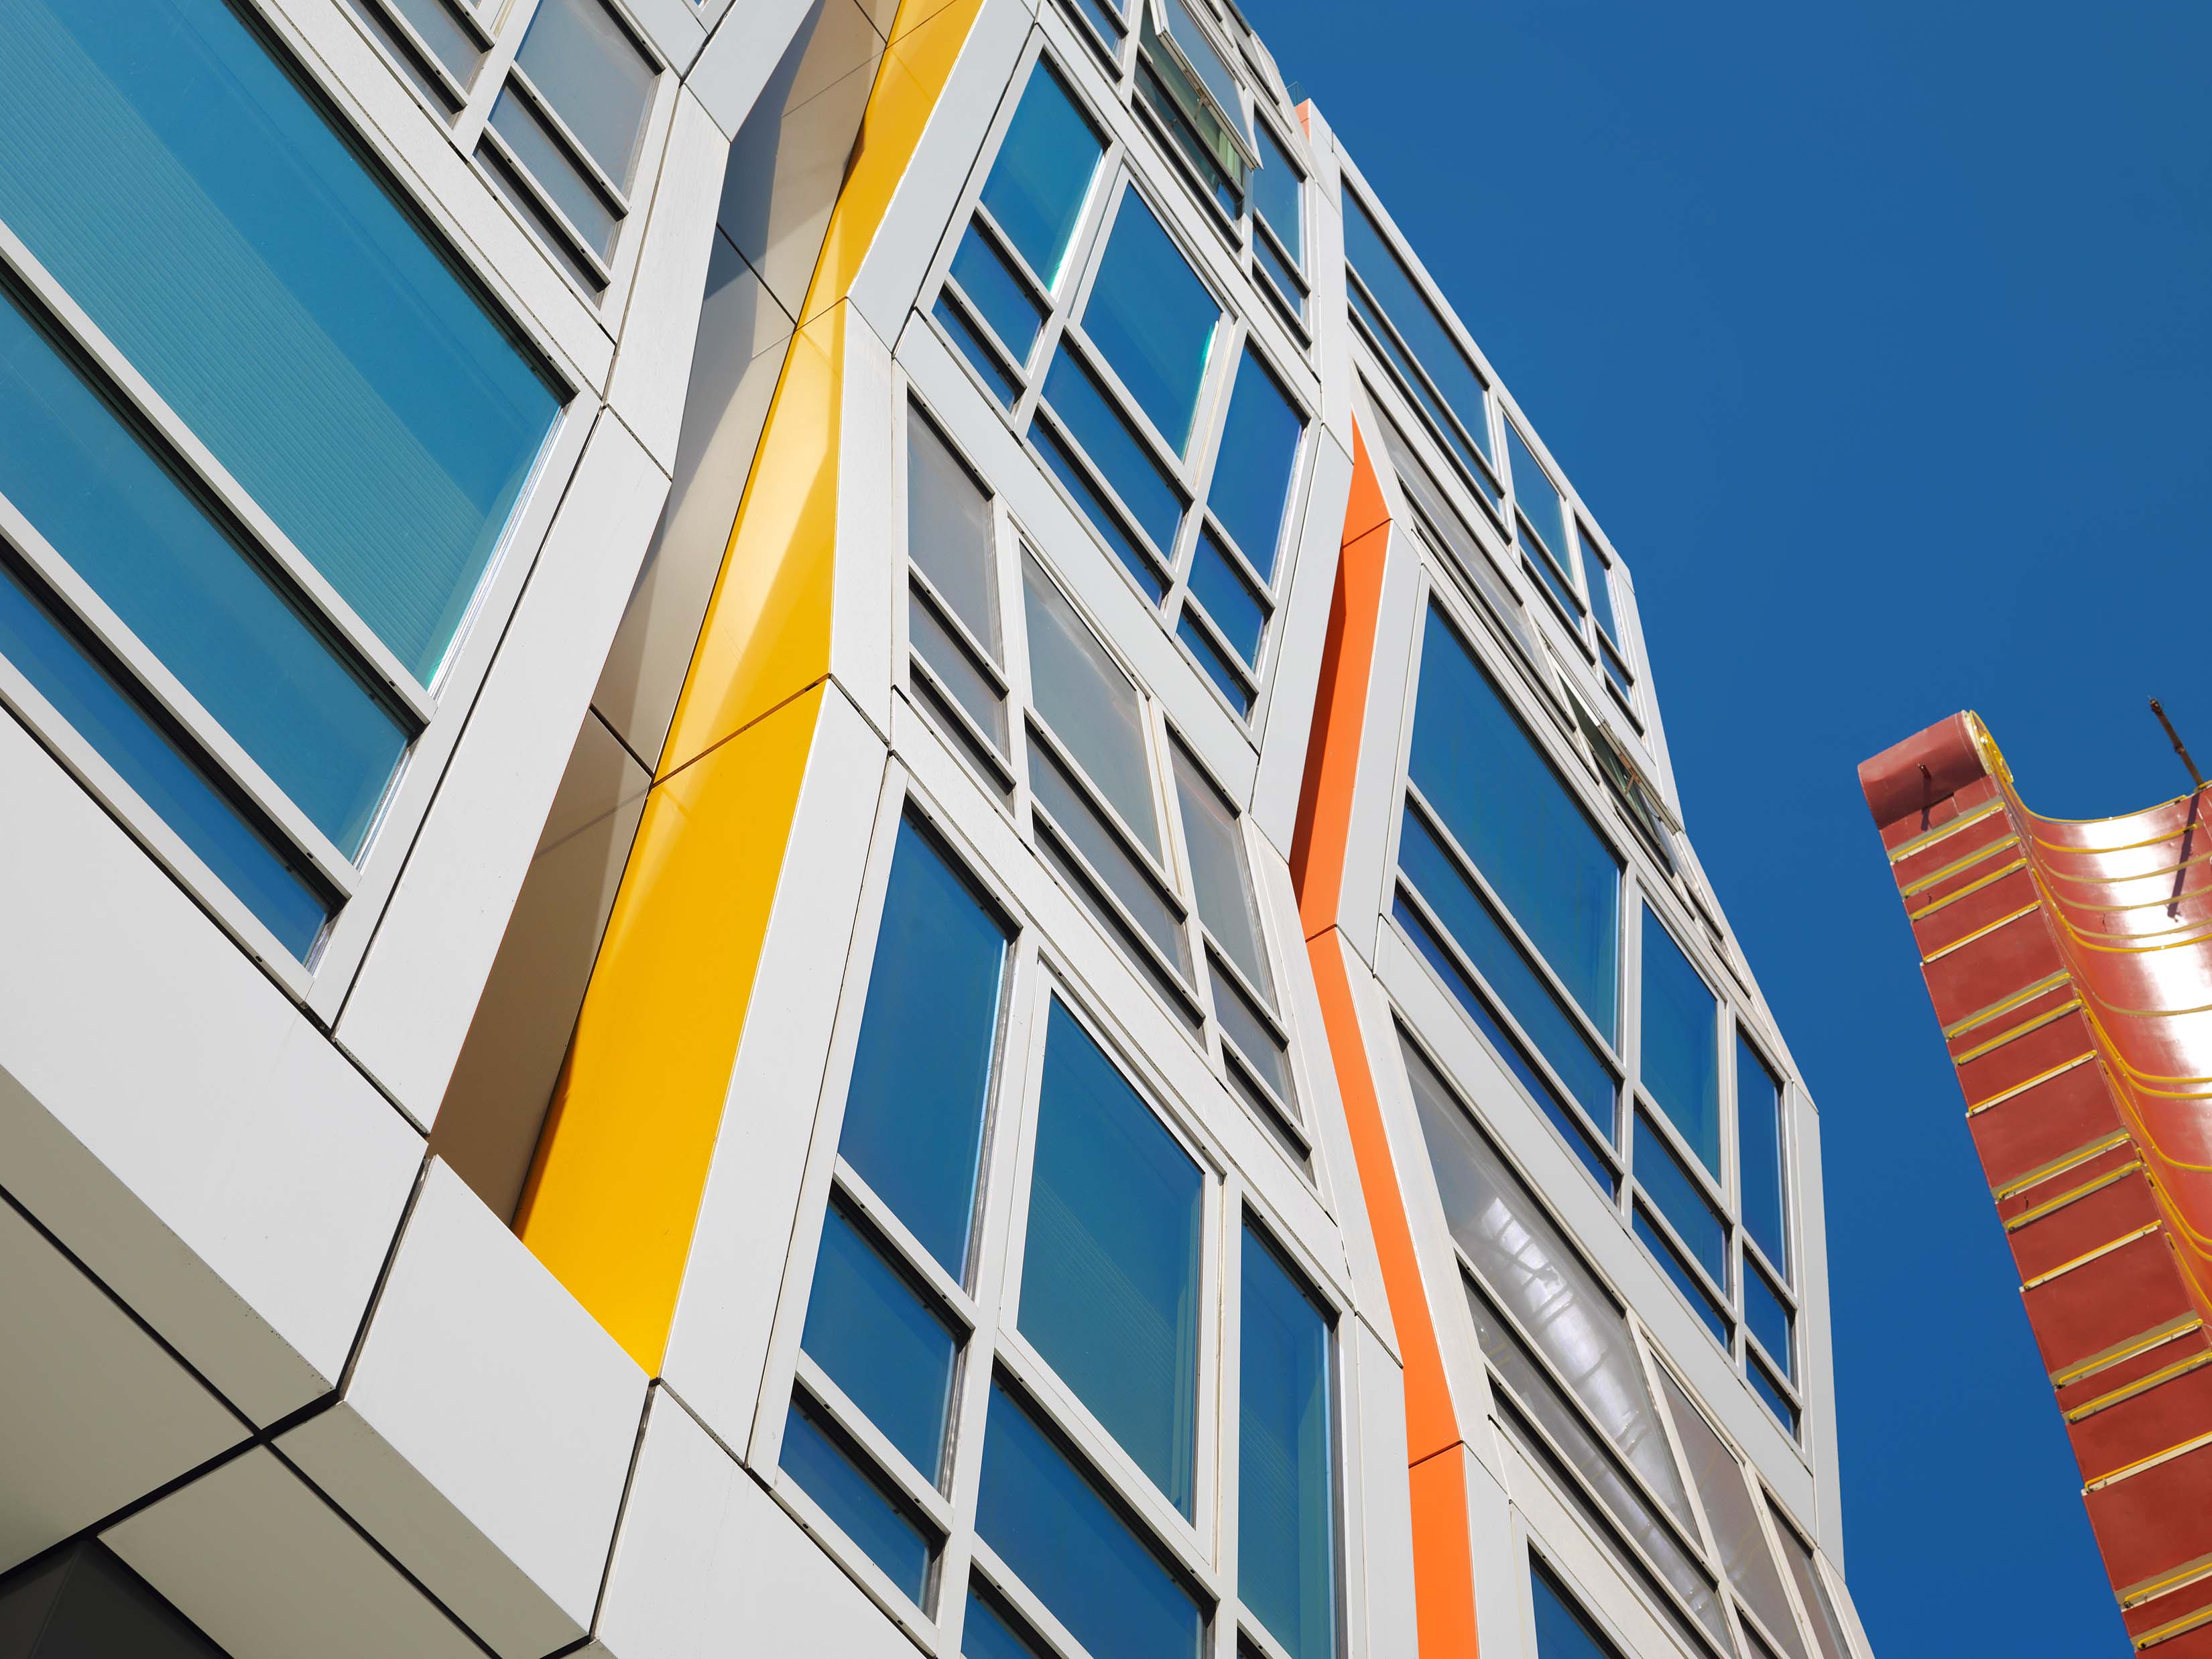 This large building has various window designs, and the building is appearing to bend in and out in a unique way. The siding is white, yellow and orange. 